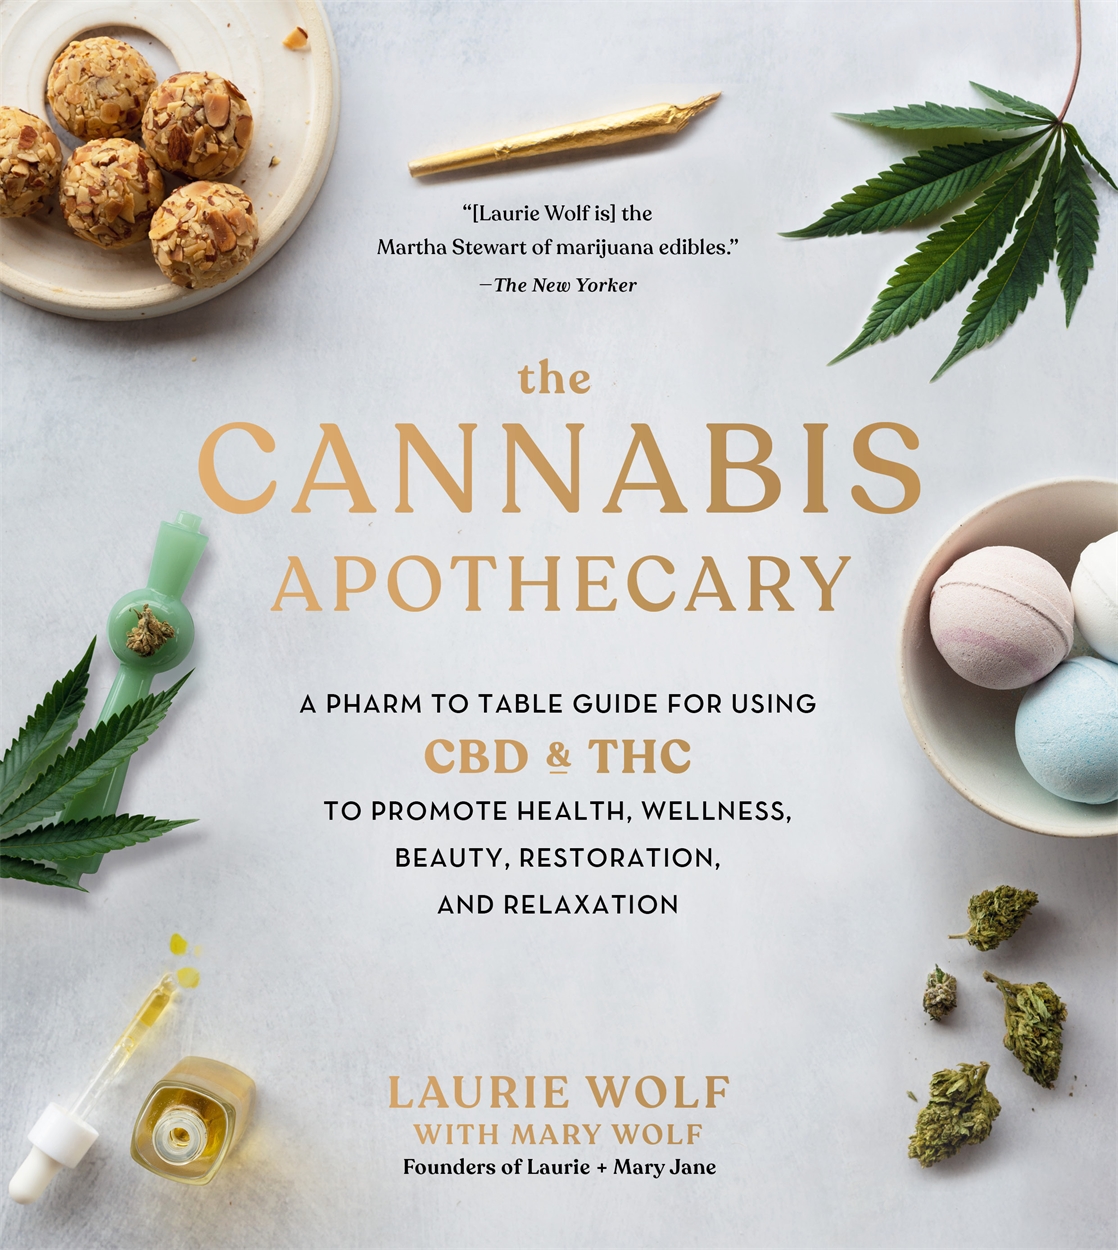 Apothecary　Cannabis　Hachette　by　Wolf　Laurie　The　UK